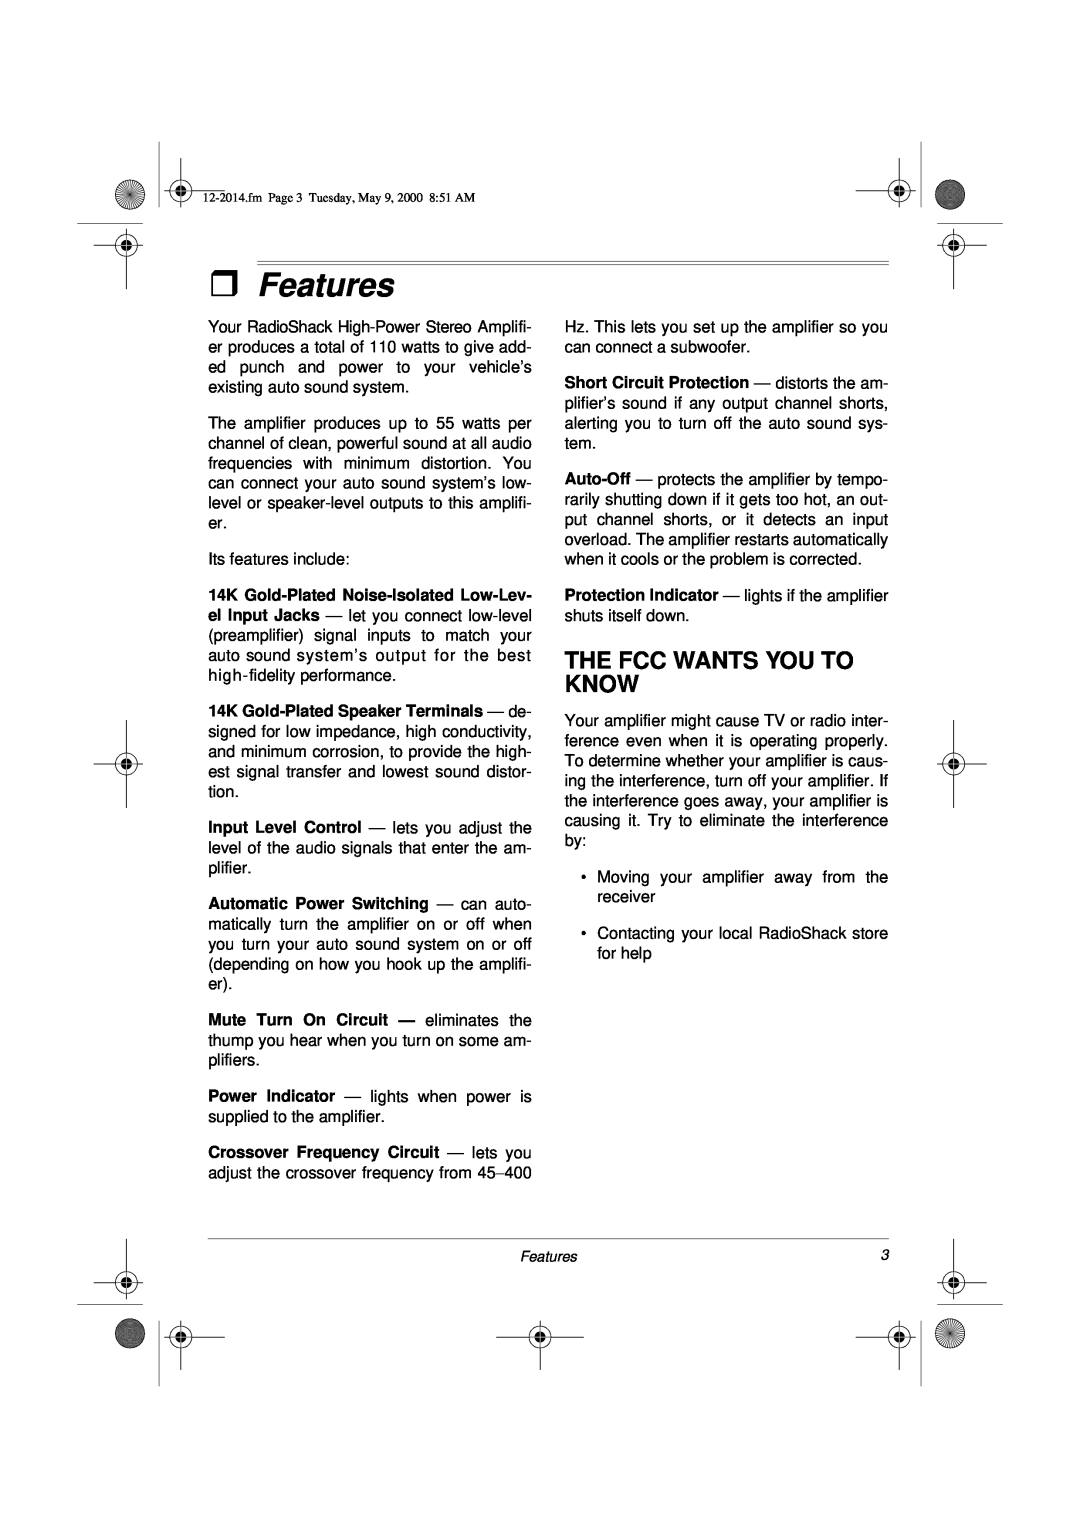 Radio Shack XL-110 owner manual ˆFeatures, The Fcc Wants You To Know 